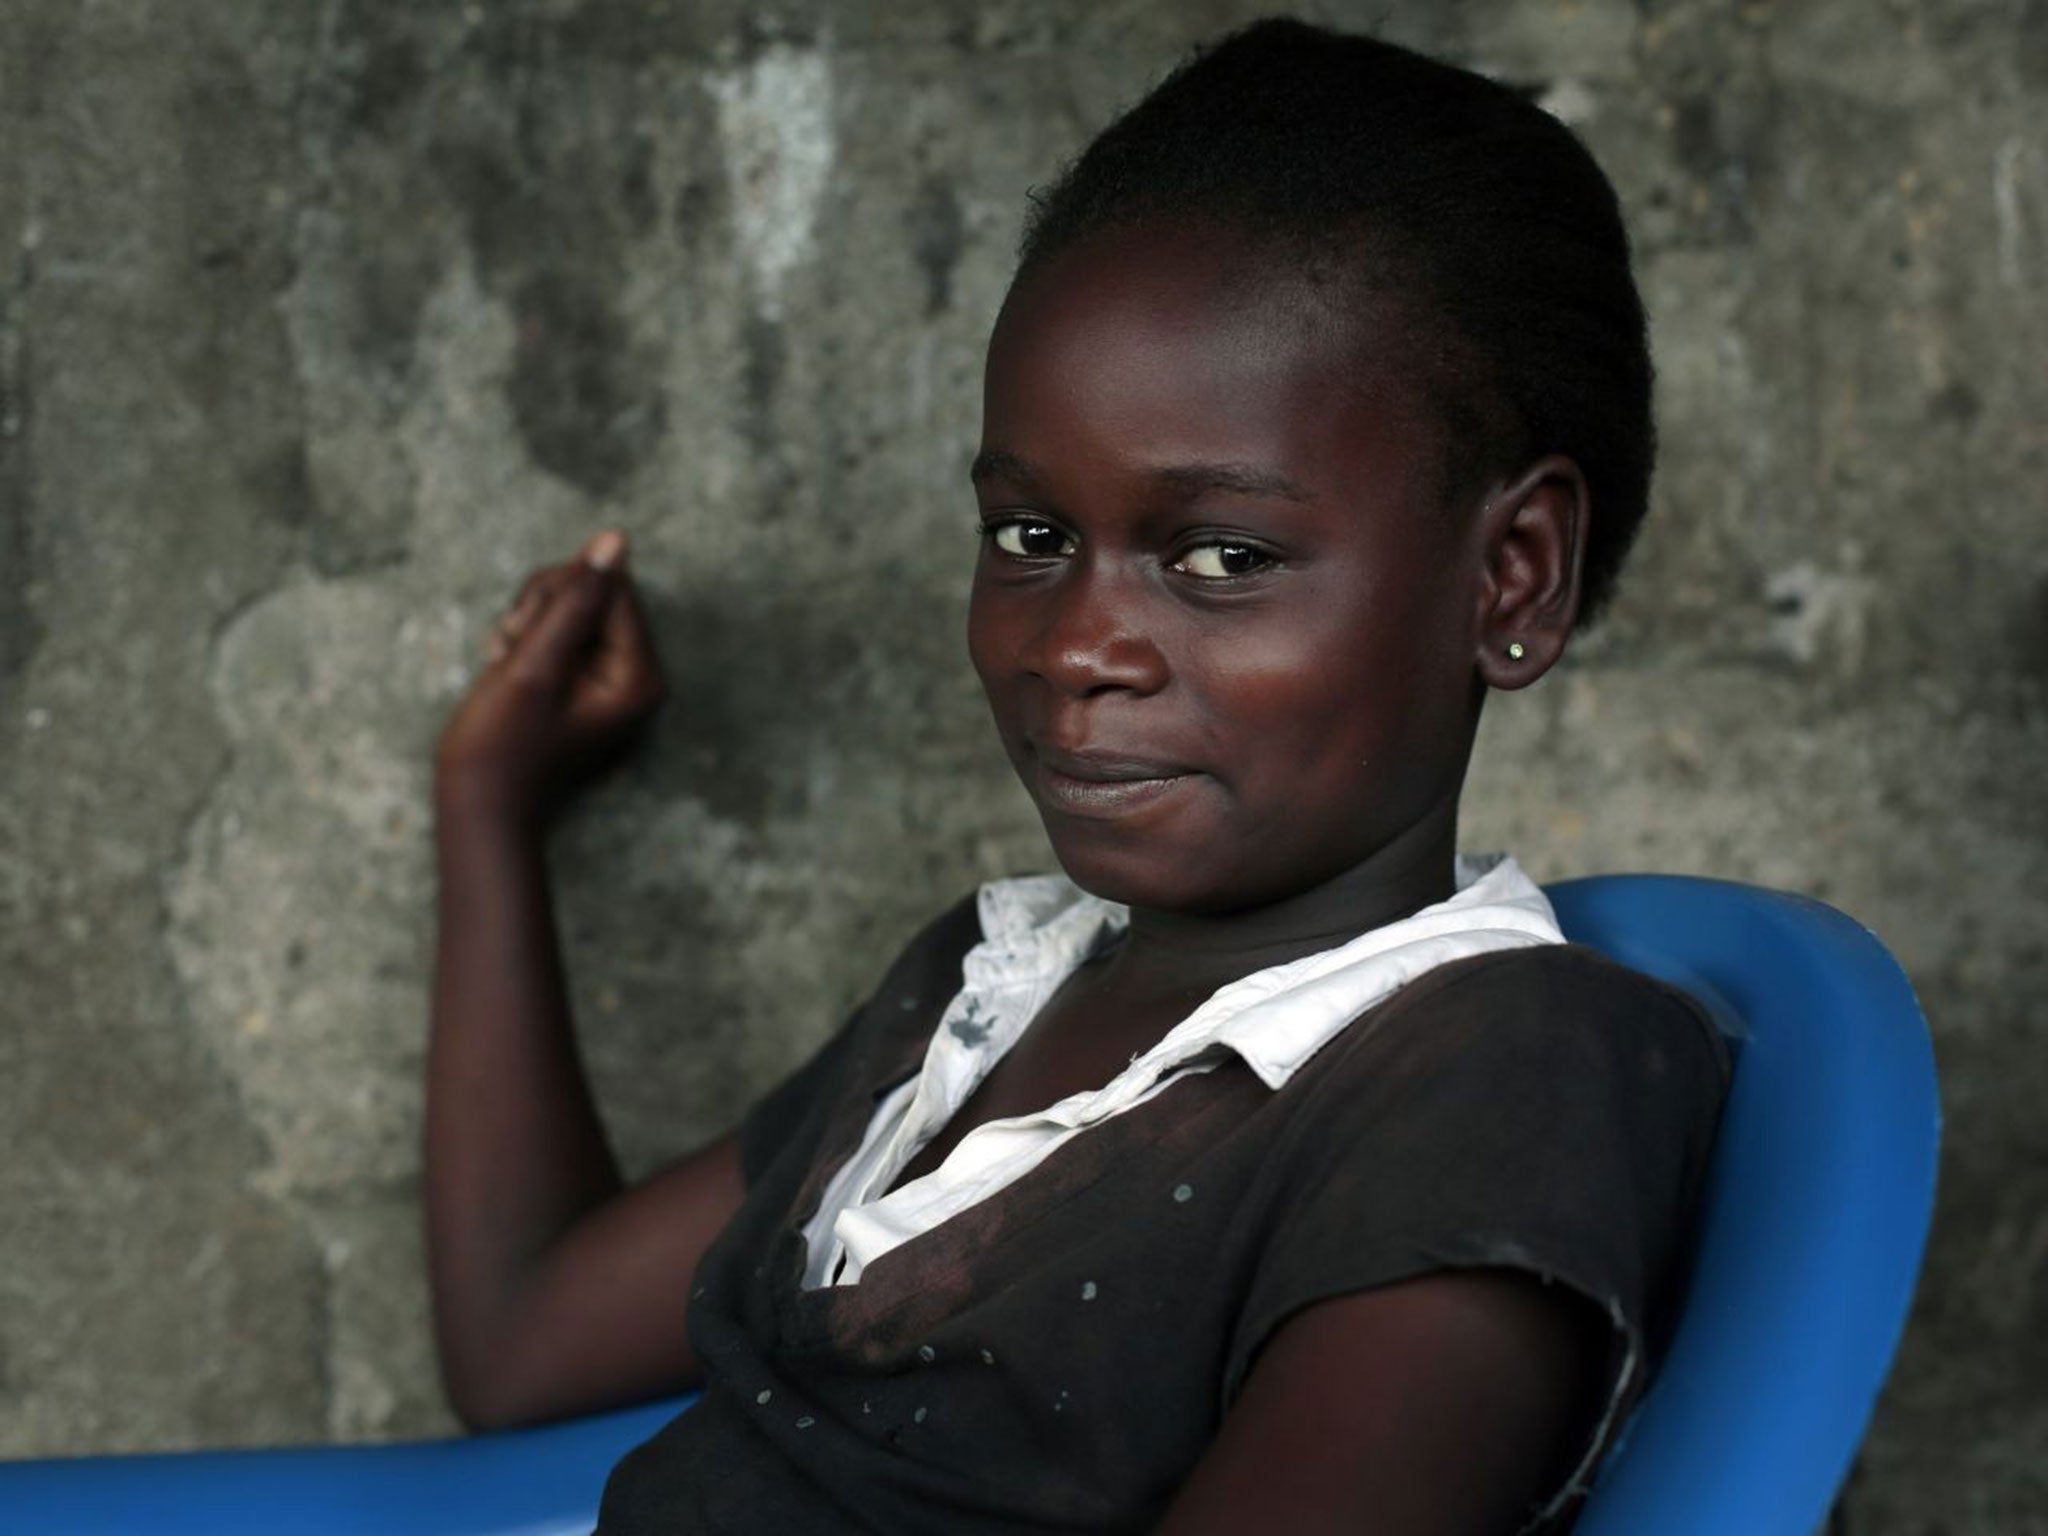 Kumba Fayah, 11, lost both parents and her sister to the Ebola virus and is now living with her extended family.